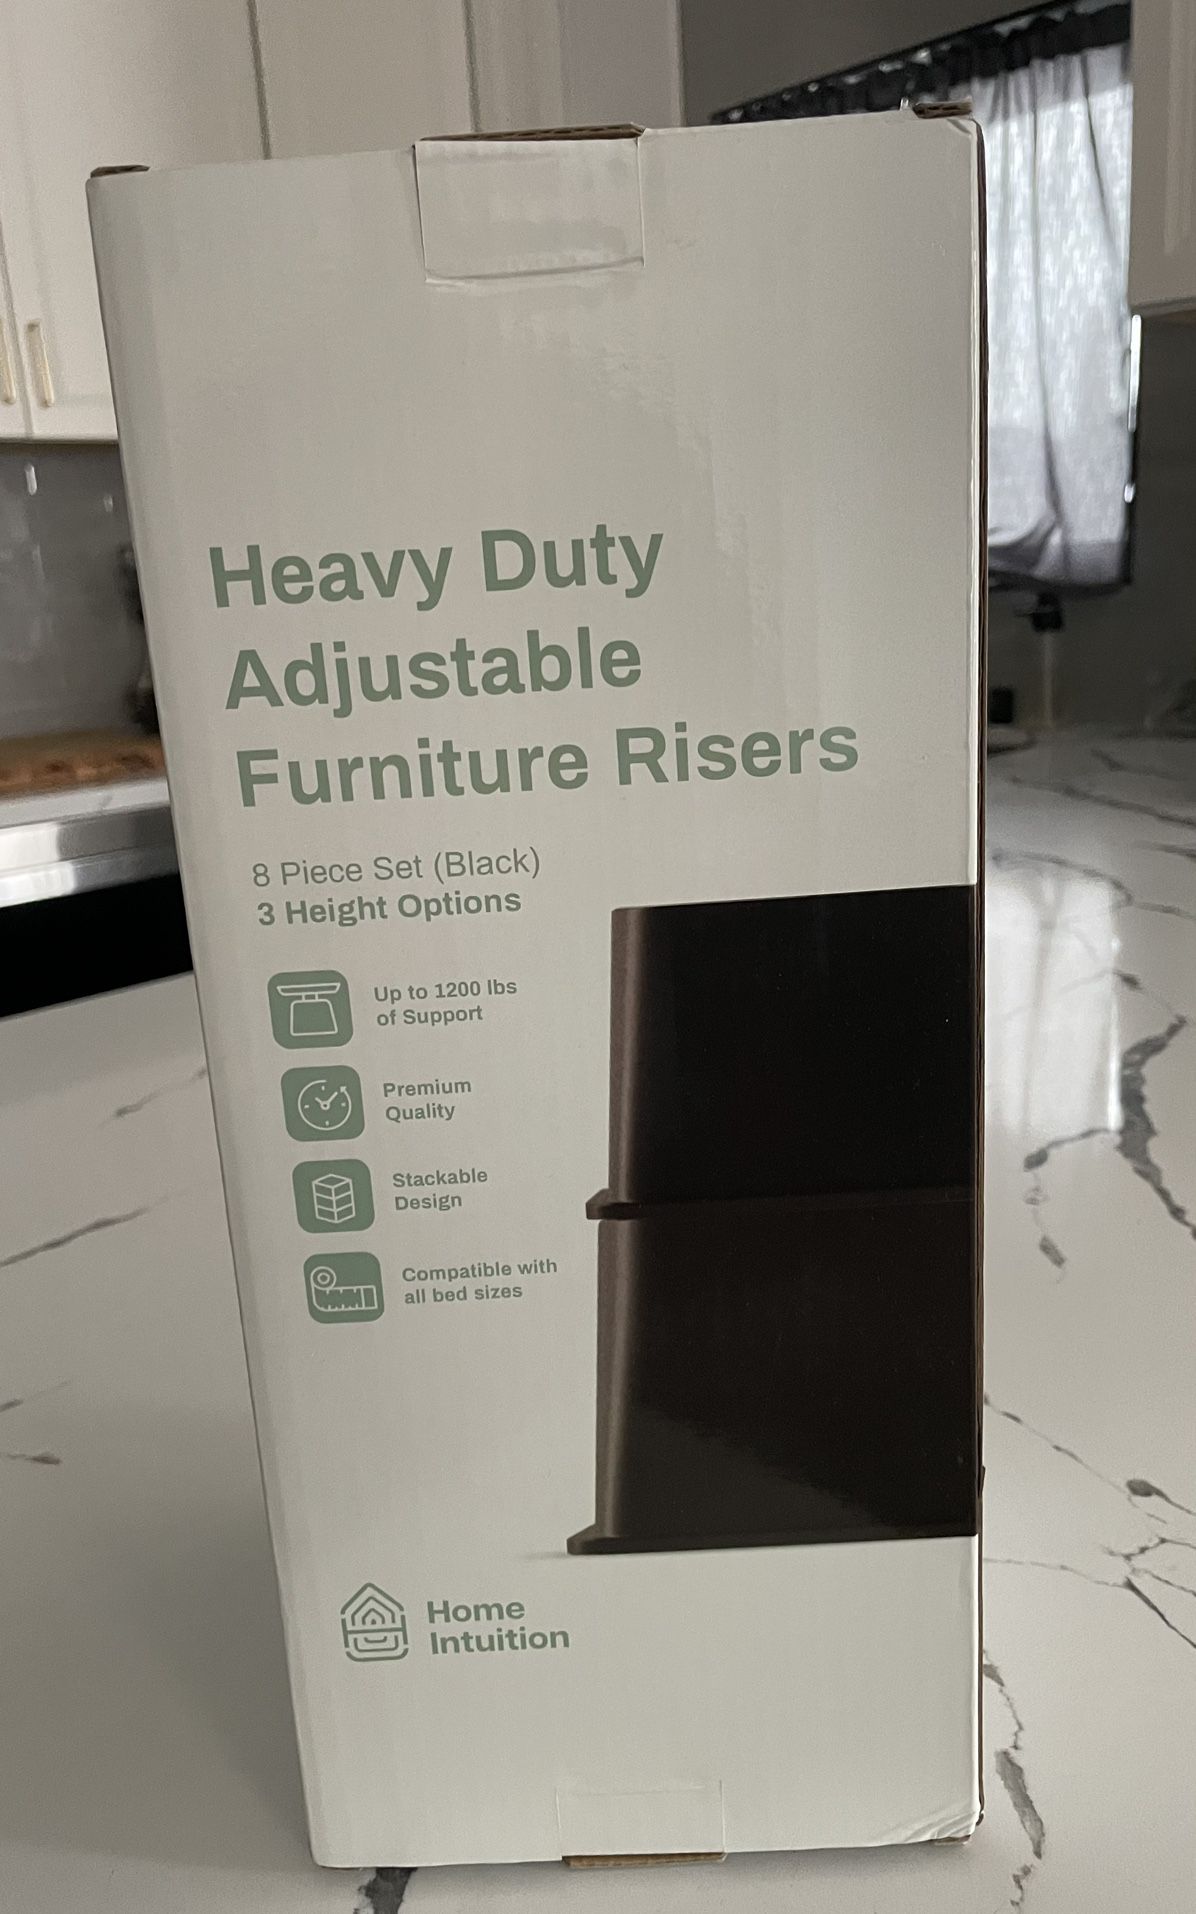 Furniture – Bed Risers (8 Pack) never used